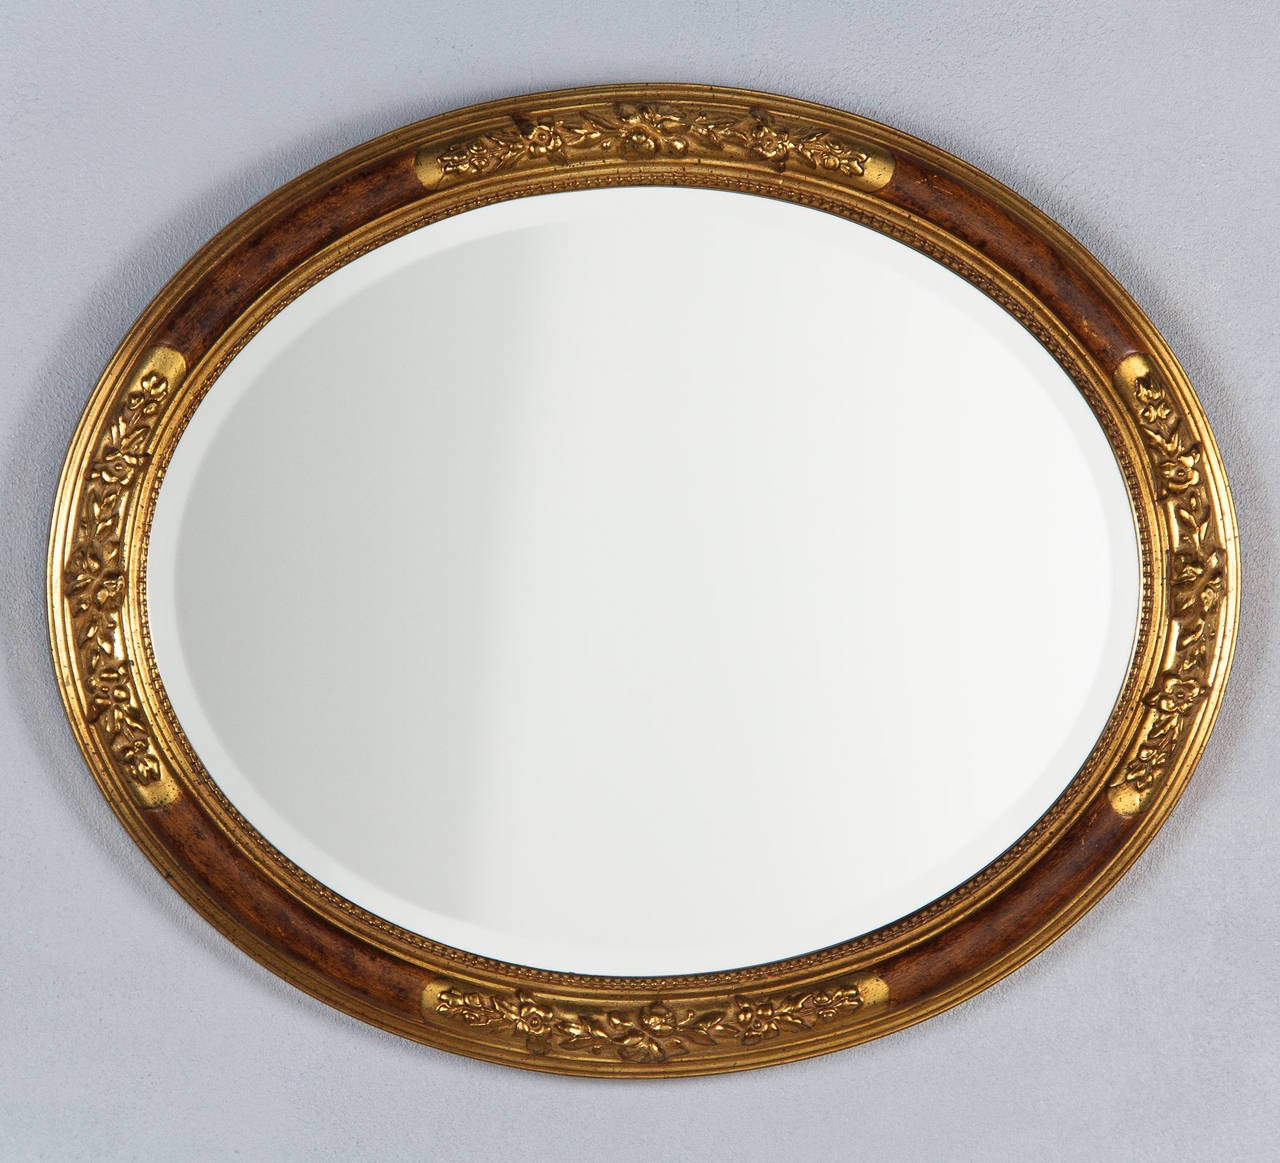 A delightful Oval Mirror in the Louis XVI style, circa 1930's, that can be hung vertically or horizontally. The mahogany frame has gilded accents with flower motifs. The beveled glass has a beaded edge.